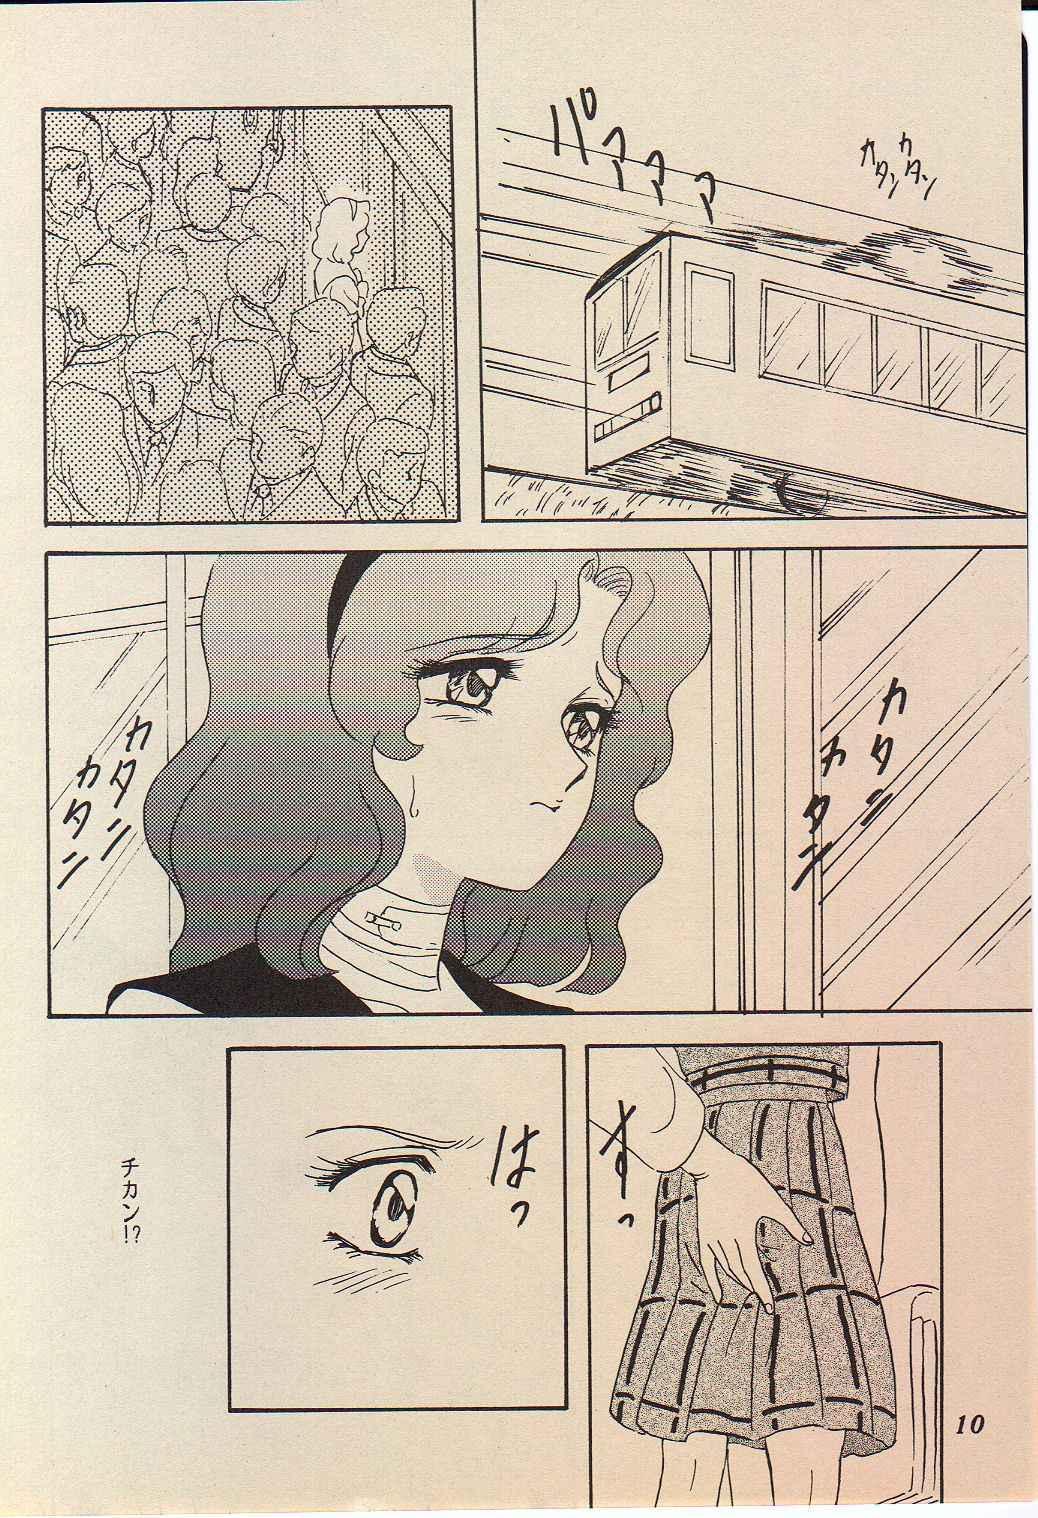 Transexual Lunch Box 11 - Twinkle Twinkle - Sailor moon Ngentot - Page 9